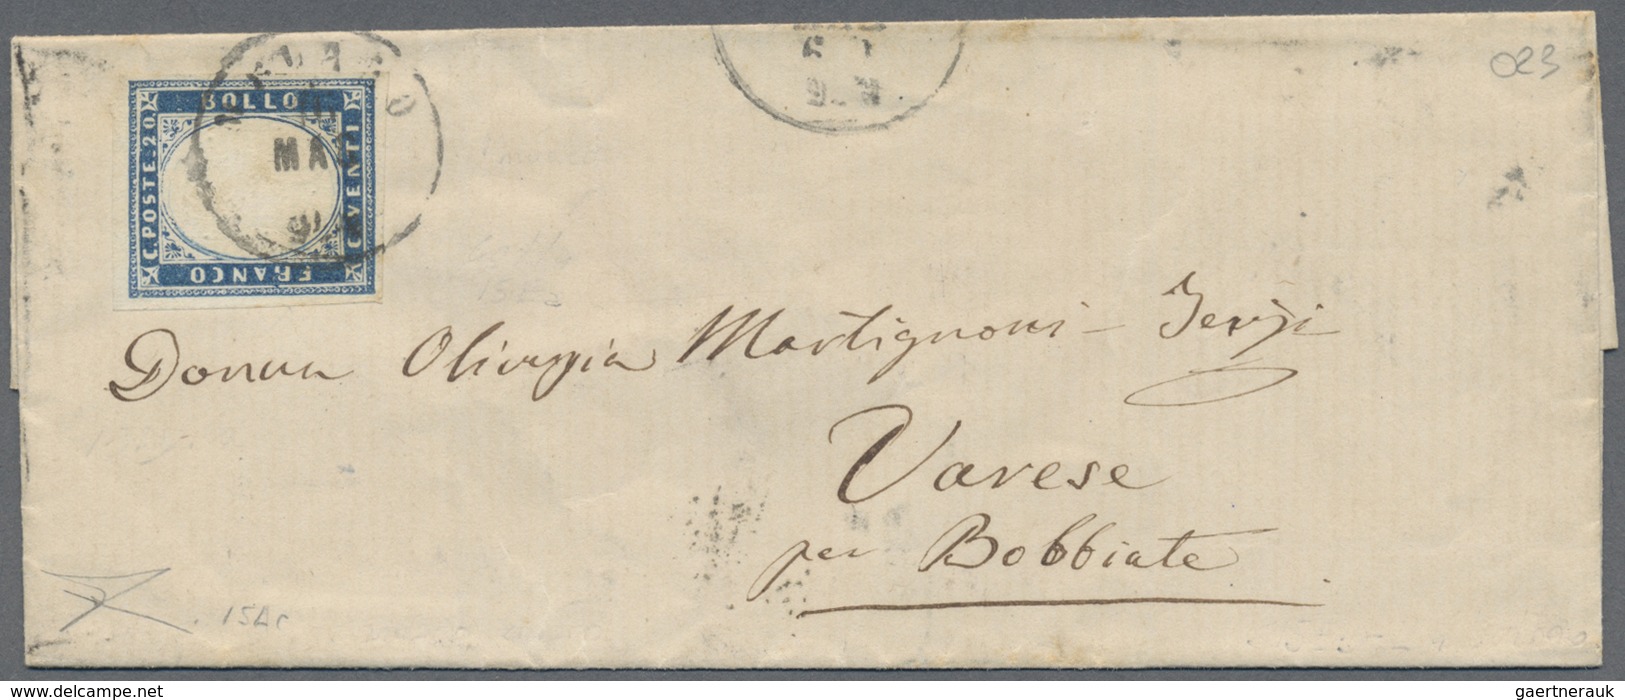 Br Italien - Altitalienische Staaten: Sardinien: 1857/1862: lot of 10 letters franked with the the blue